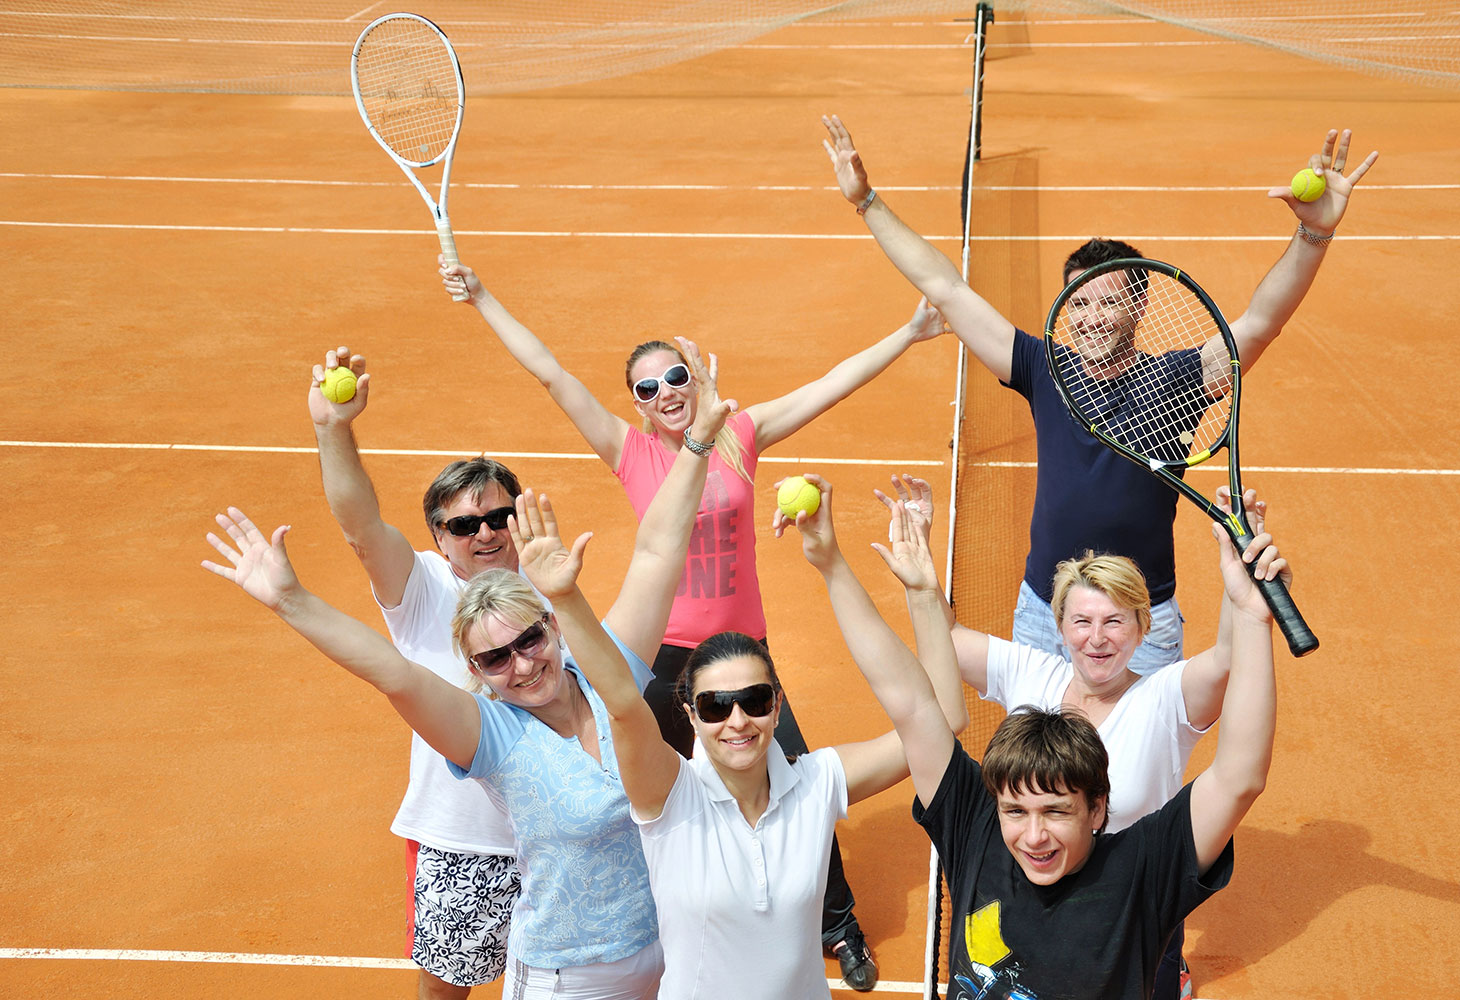 A group of amateur tennis players celebrating a good game.